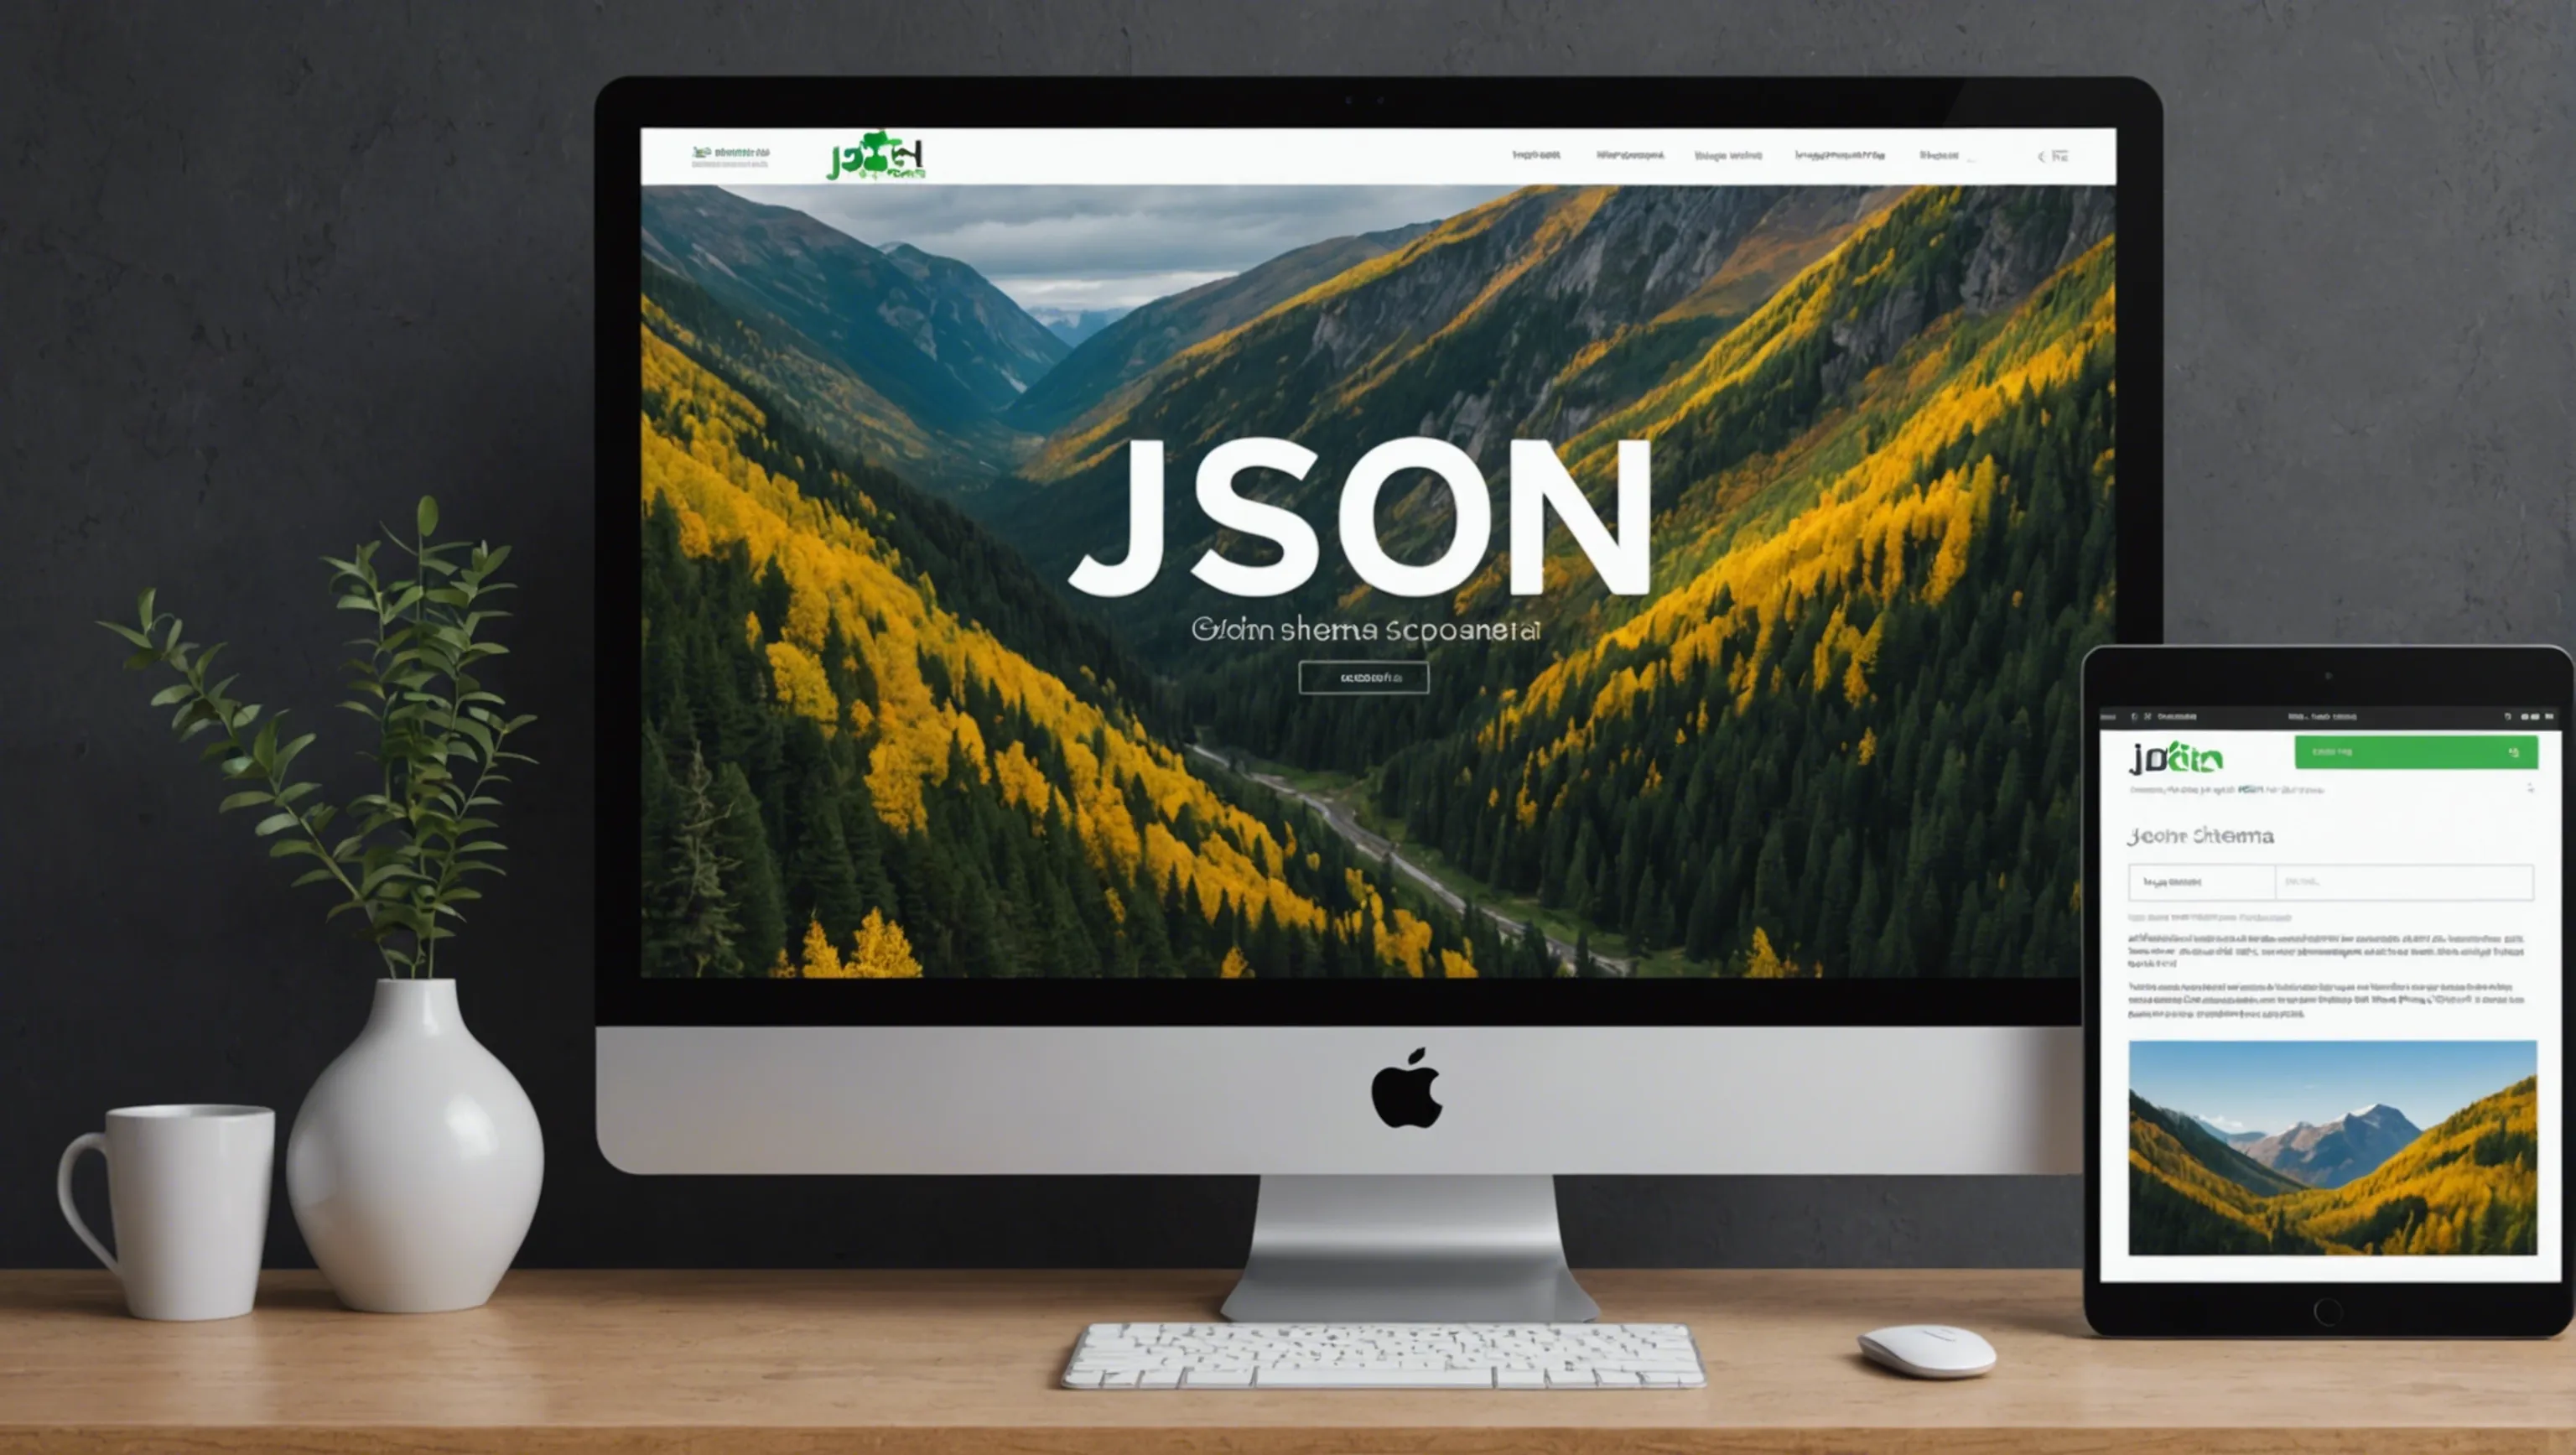 Implementing JSON-LD Schema for improved SEO and website performance